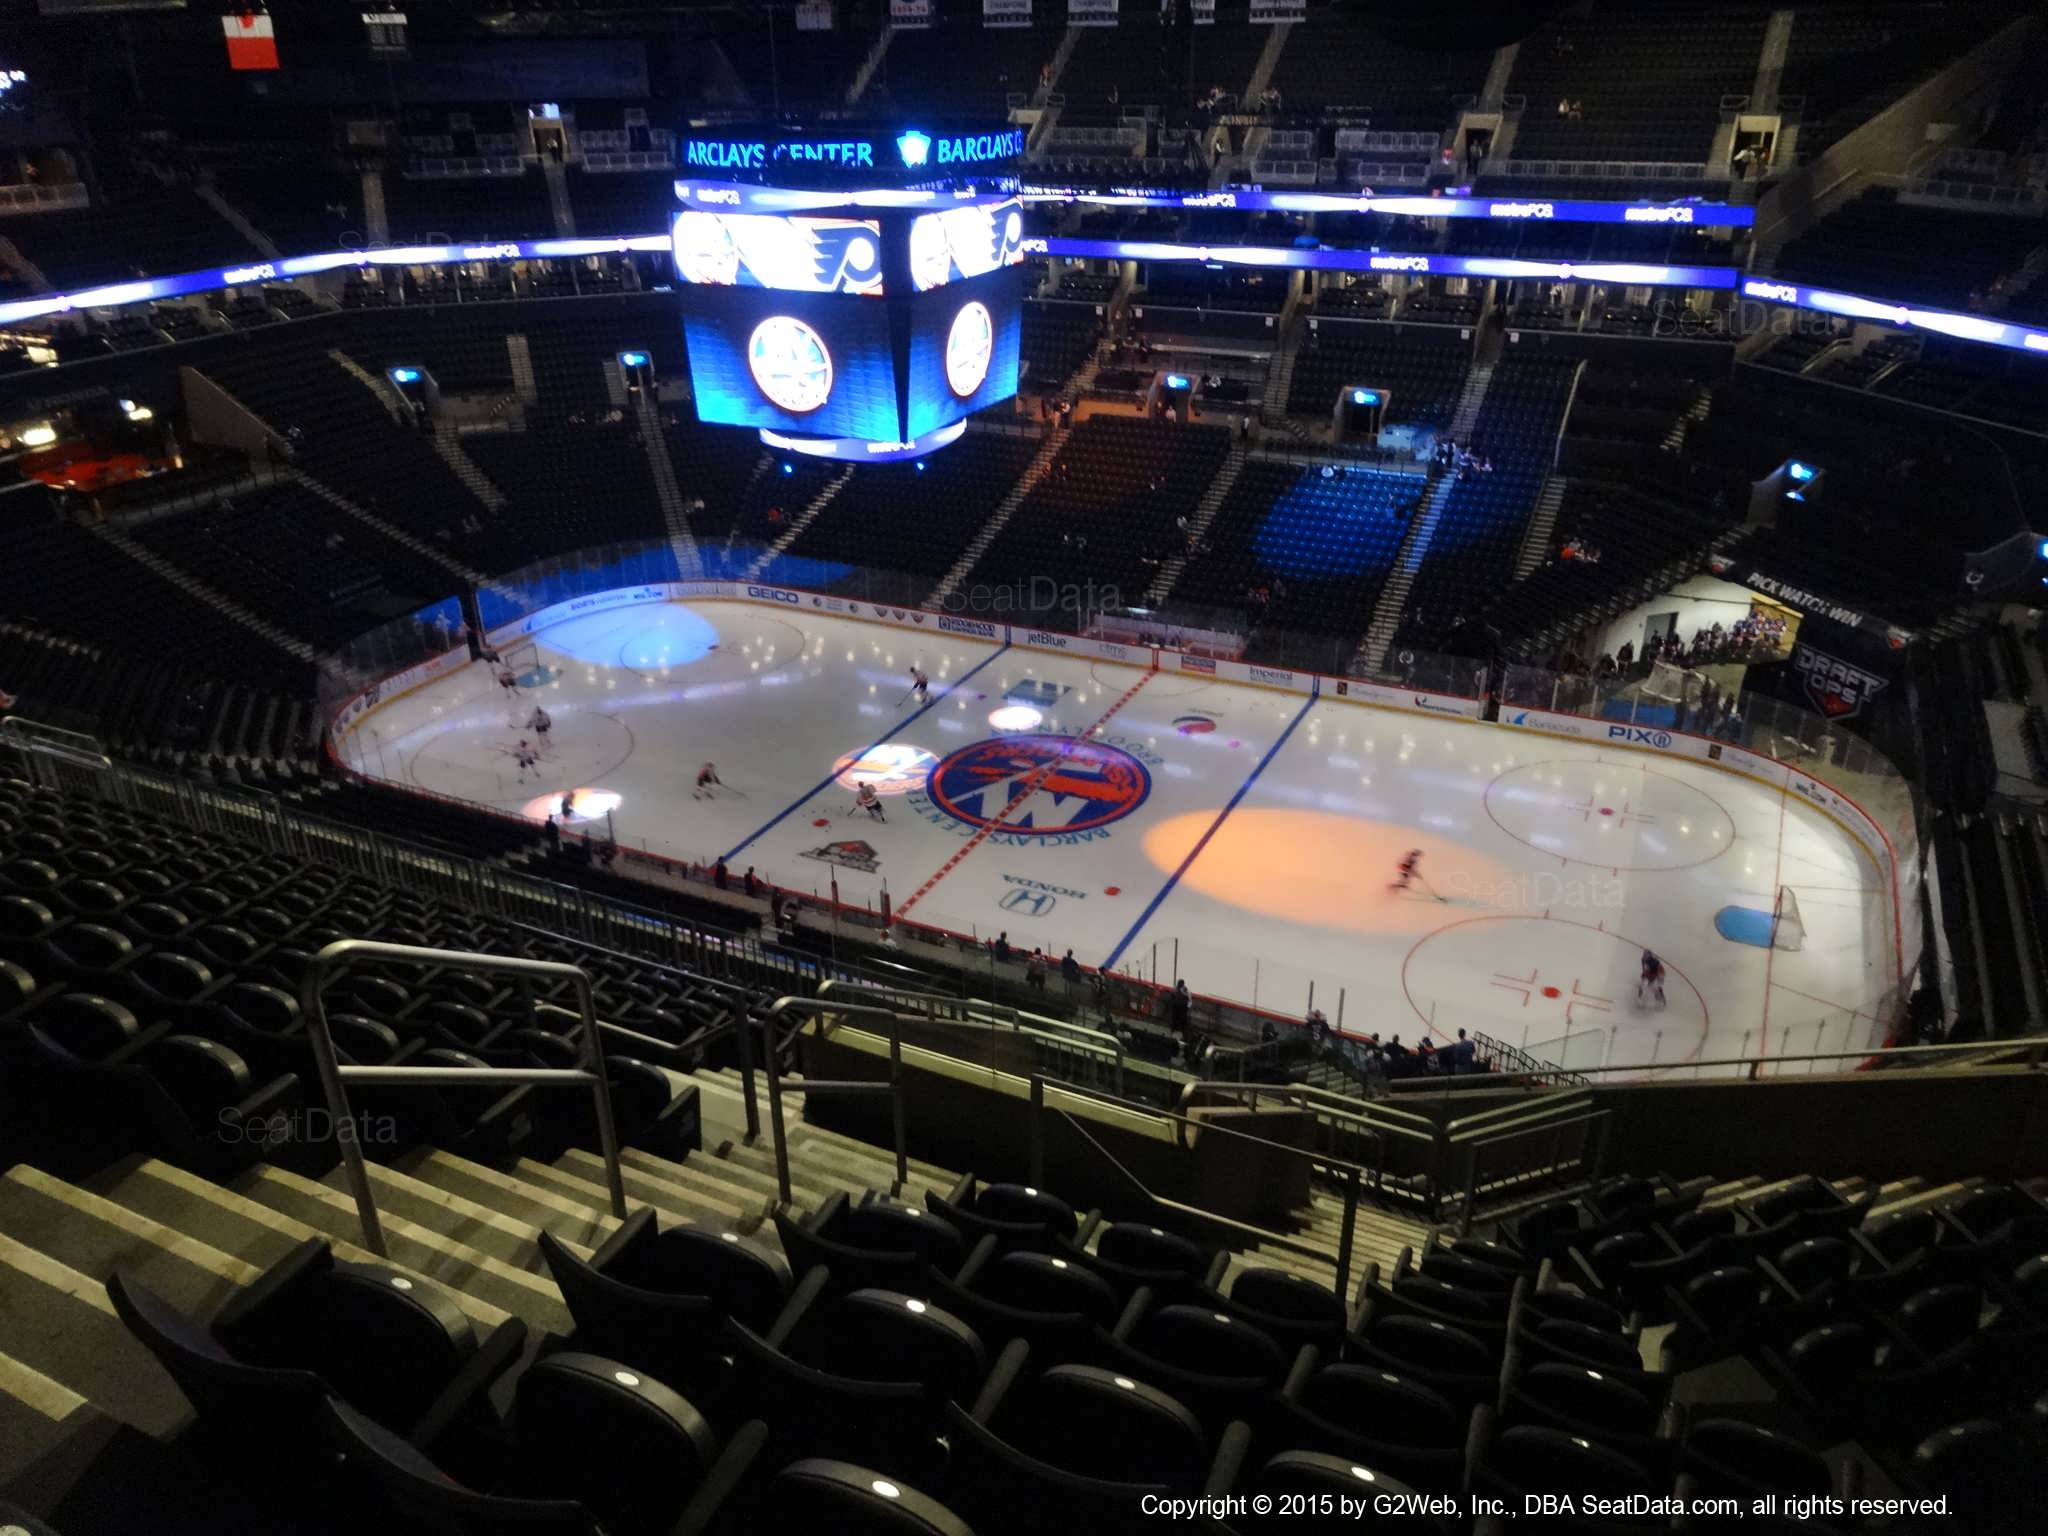 Seat View from Section 205 at the Barclays Center, home of the New York Islanders